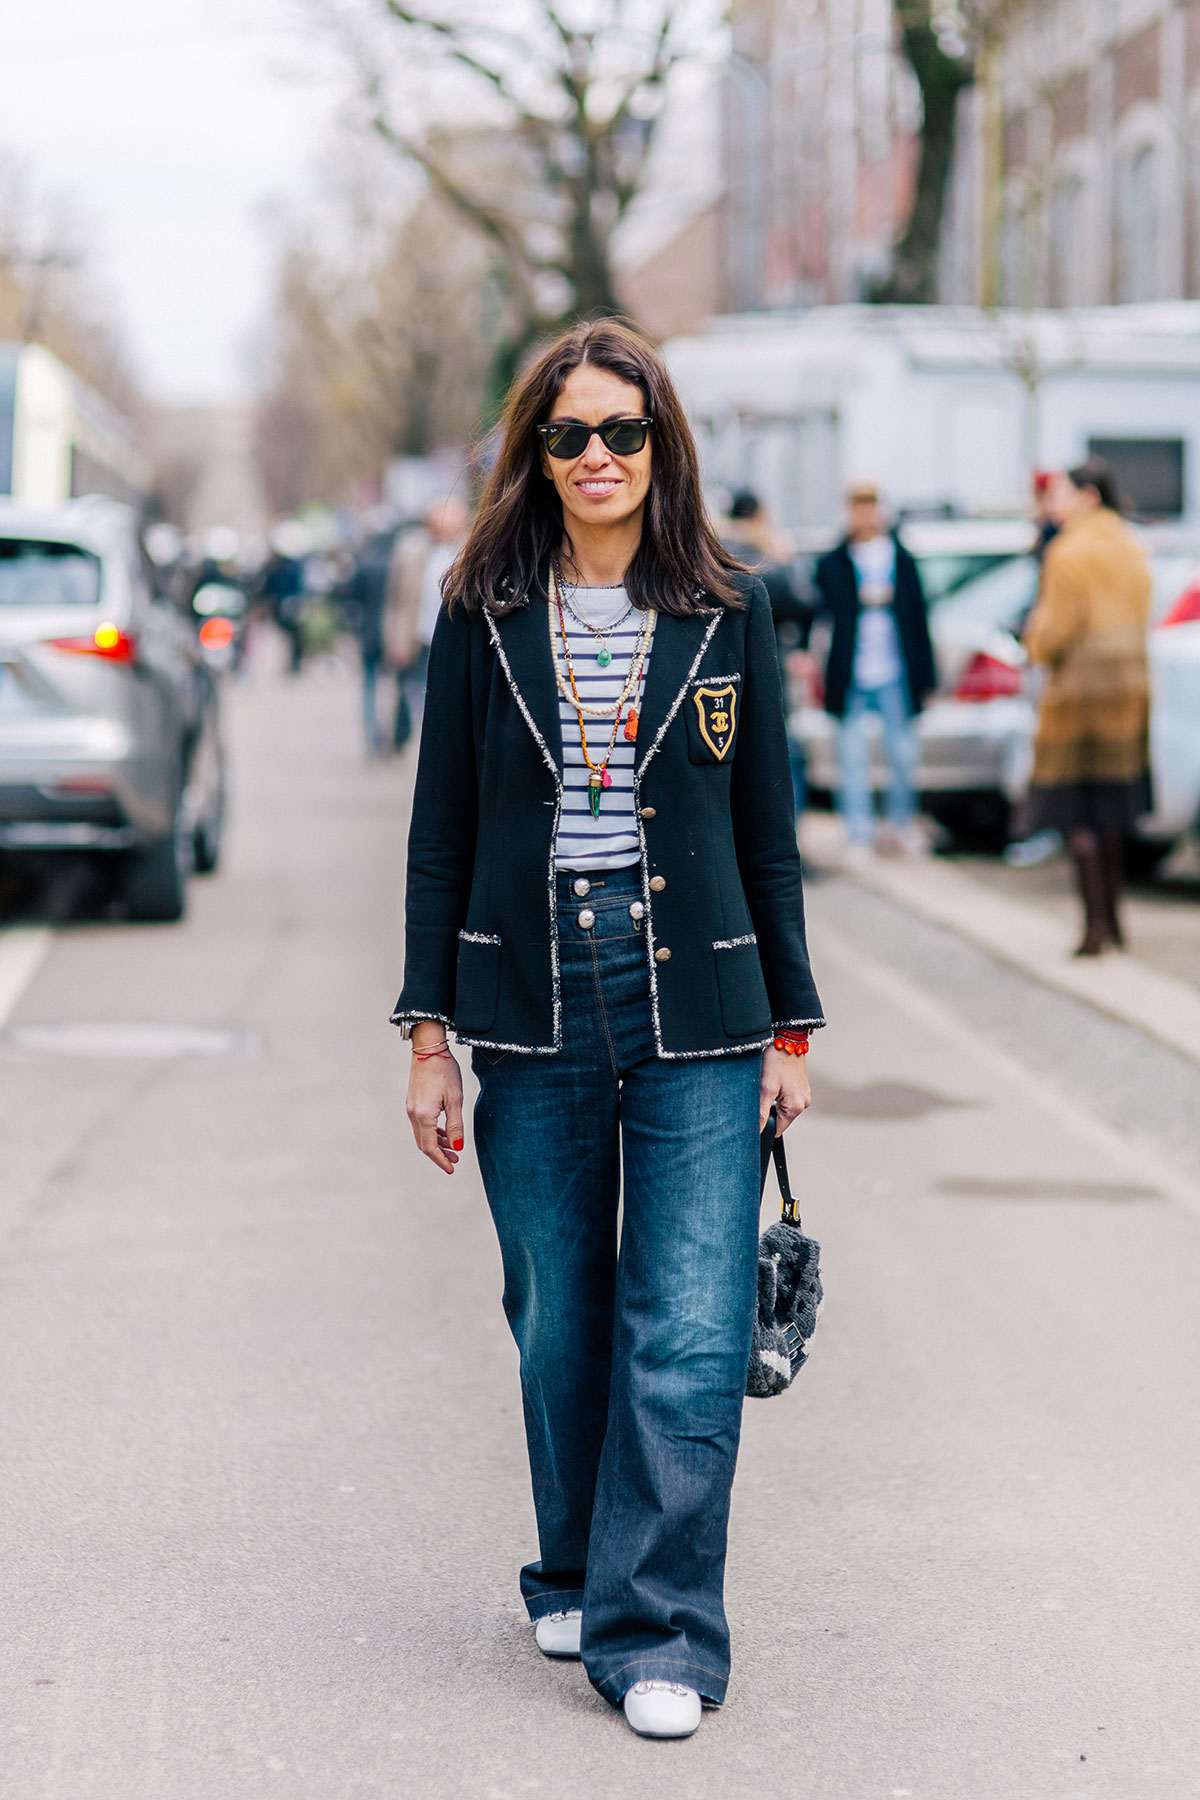 Viviana Volpicella wearing a Chanel jacket, Gucci jeans and shoes and Fendi bag before the Fendi Fall/Winter 2015-2016 fashion show in Milan, Italy